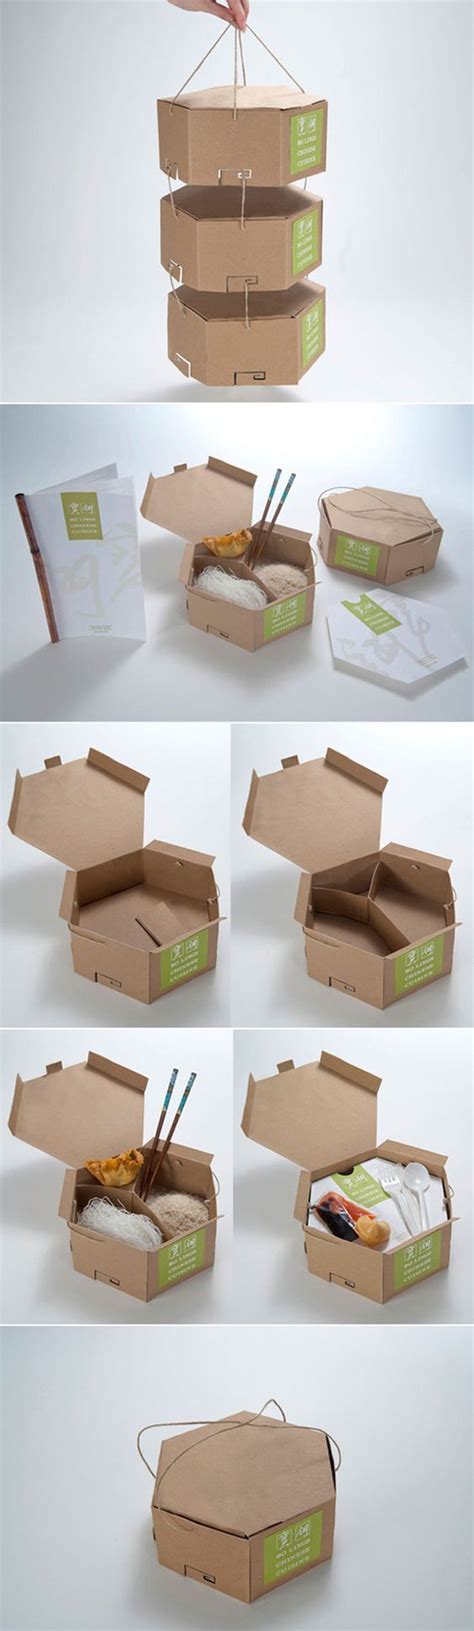 Amazing Packaging Designs For Inspiration Graphicloads Food